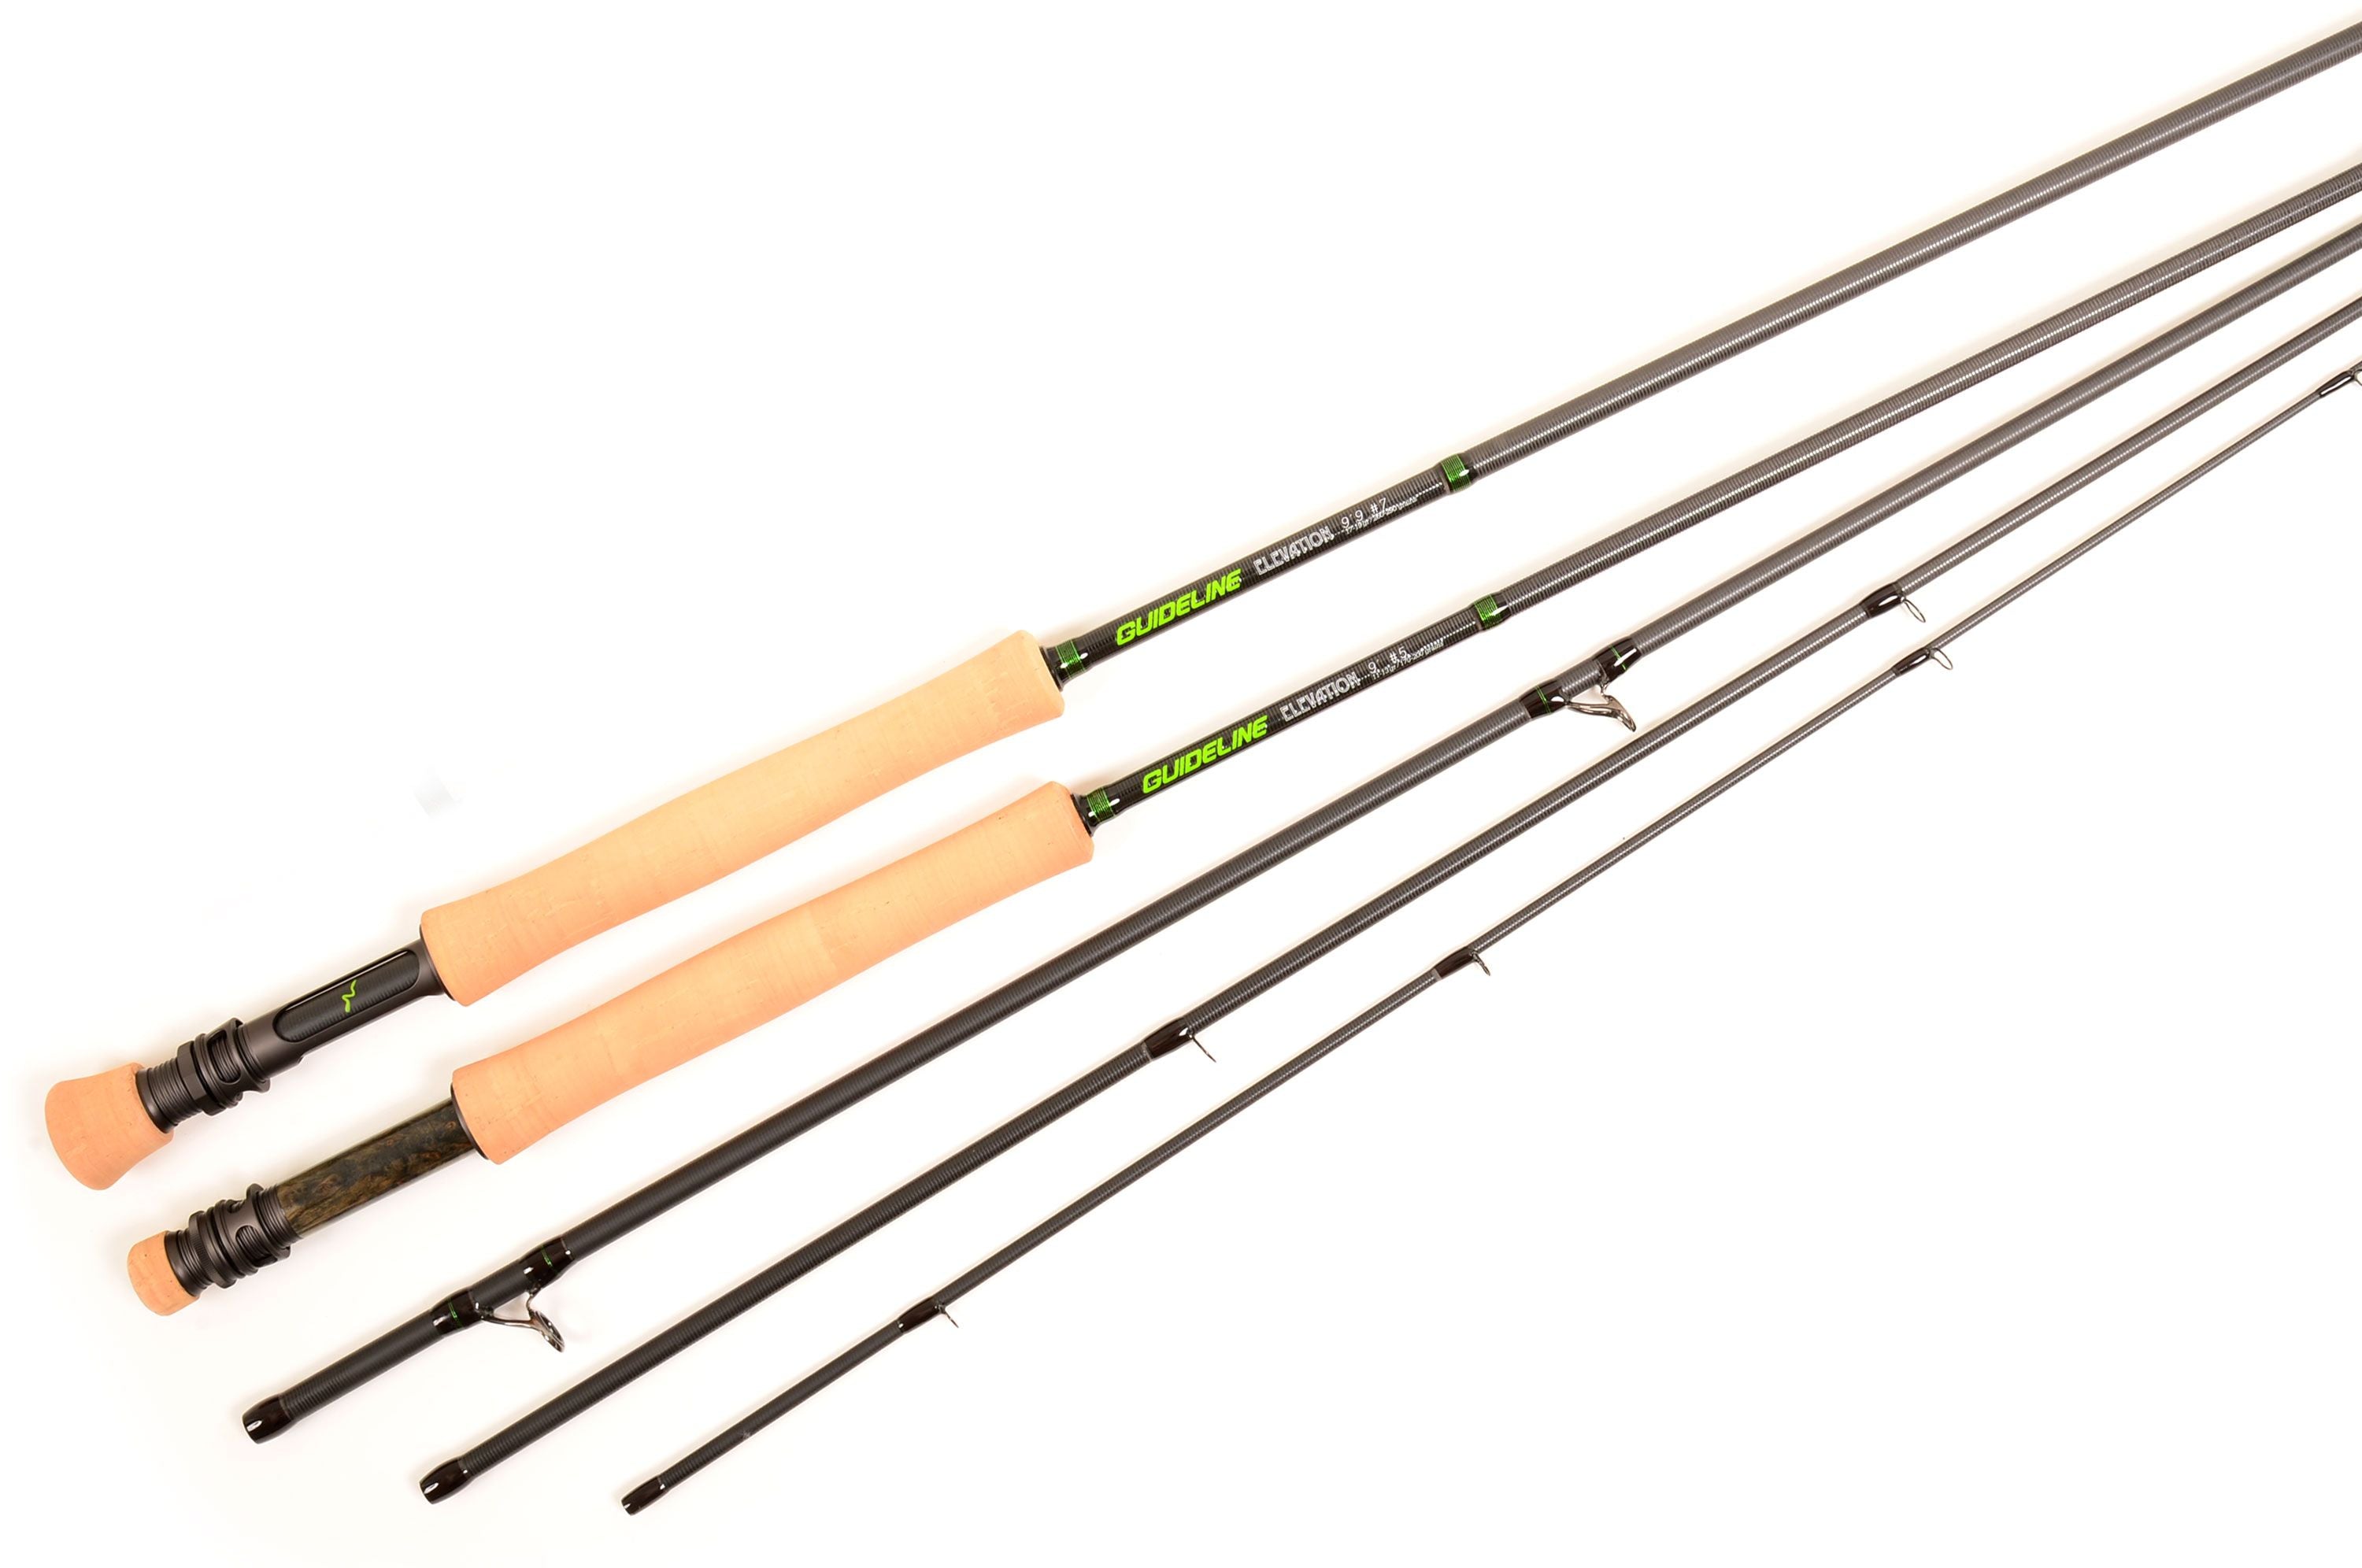 GUIDELINE ELEVATION SH 4PCE FLY RODS